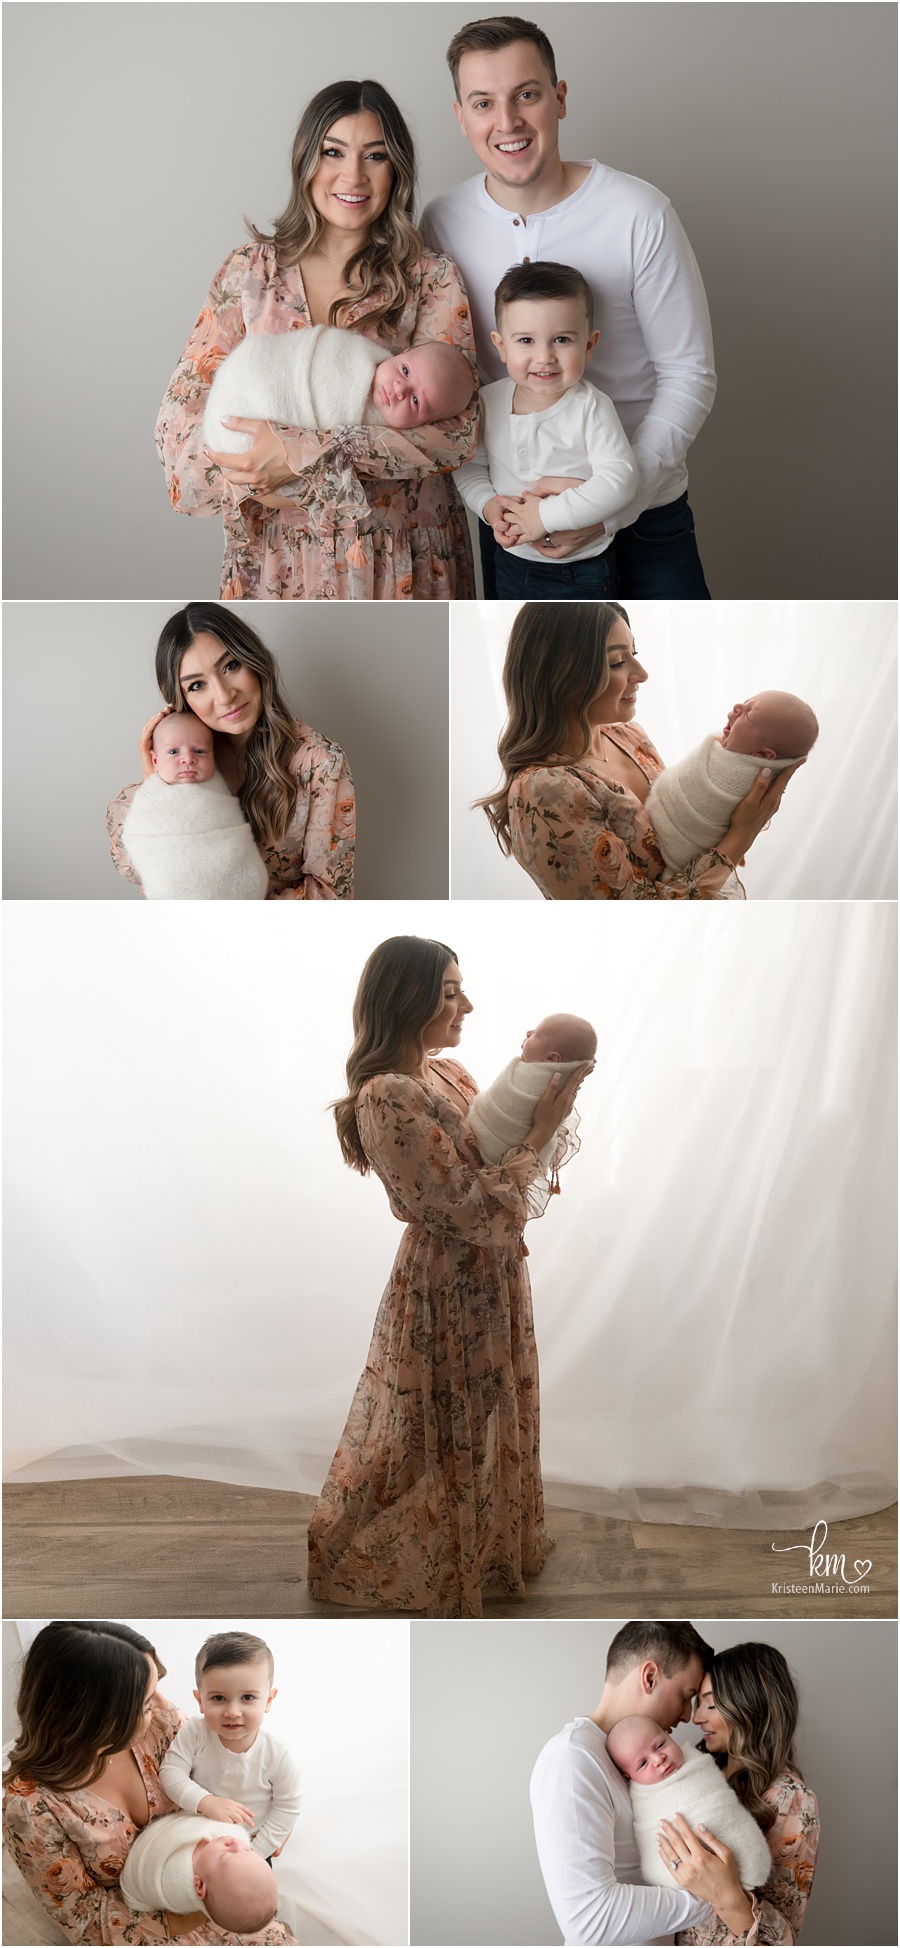 family newborn pictures - what to wear - beautiful dress